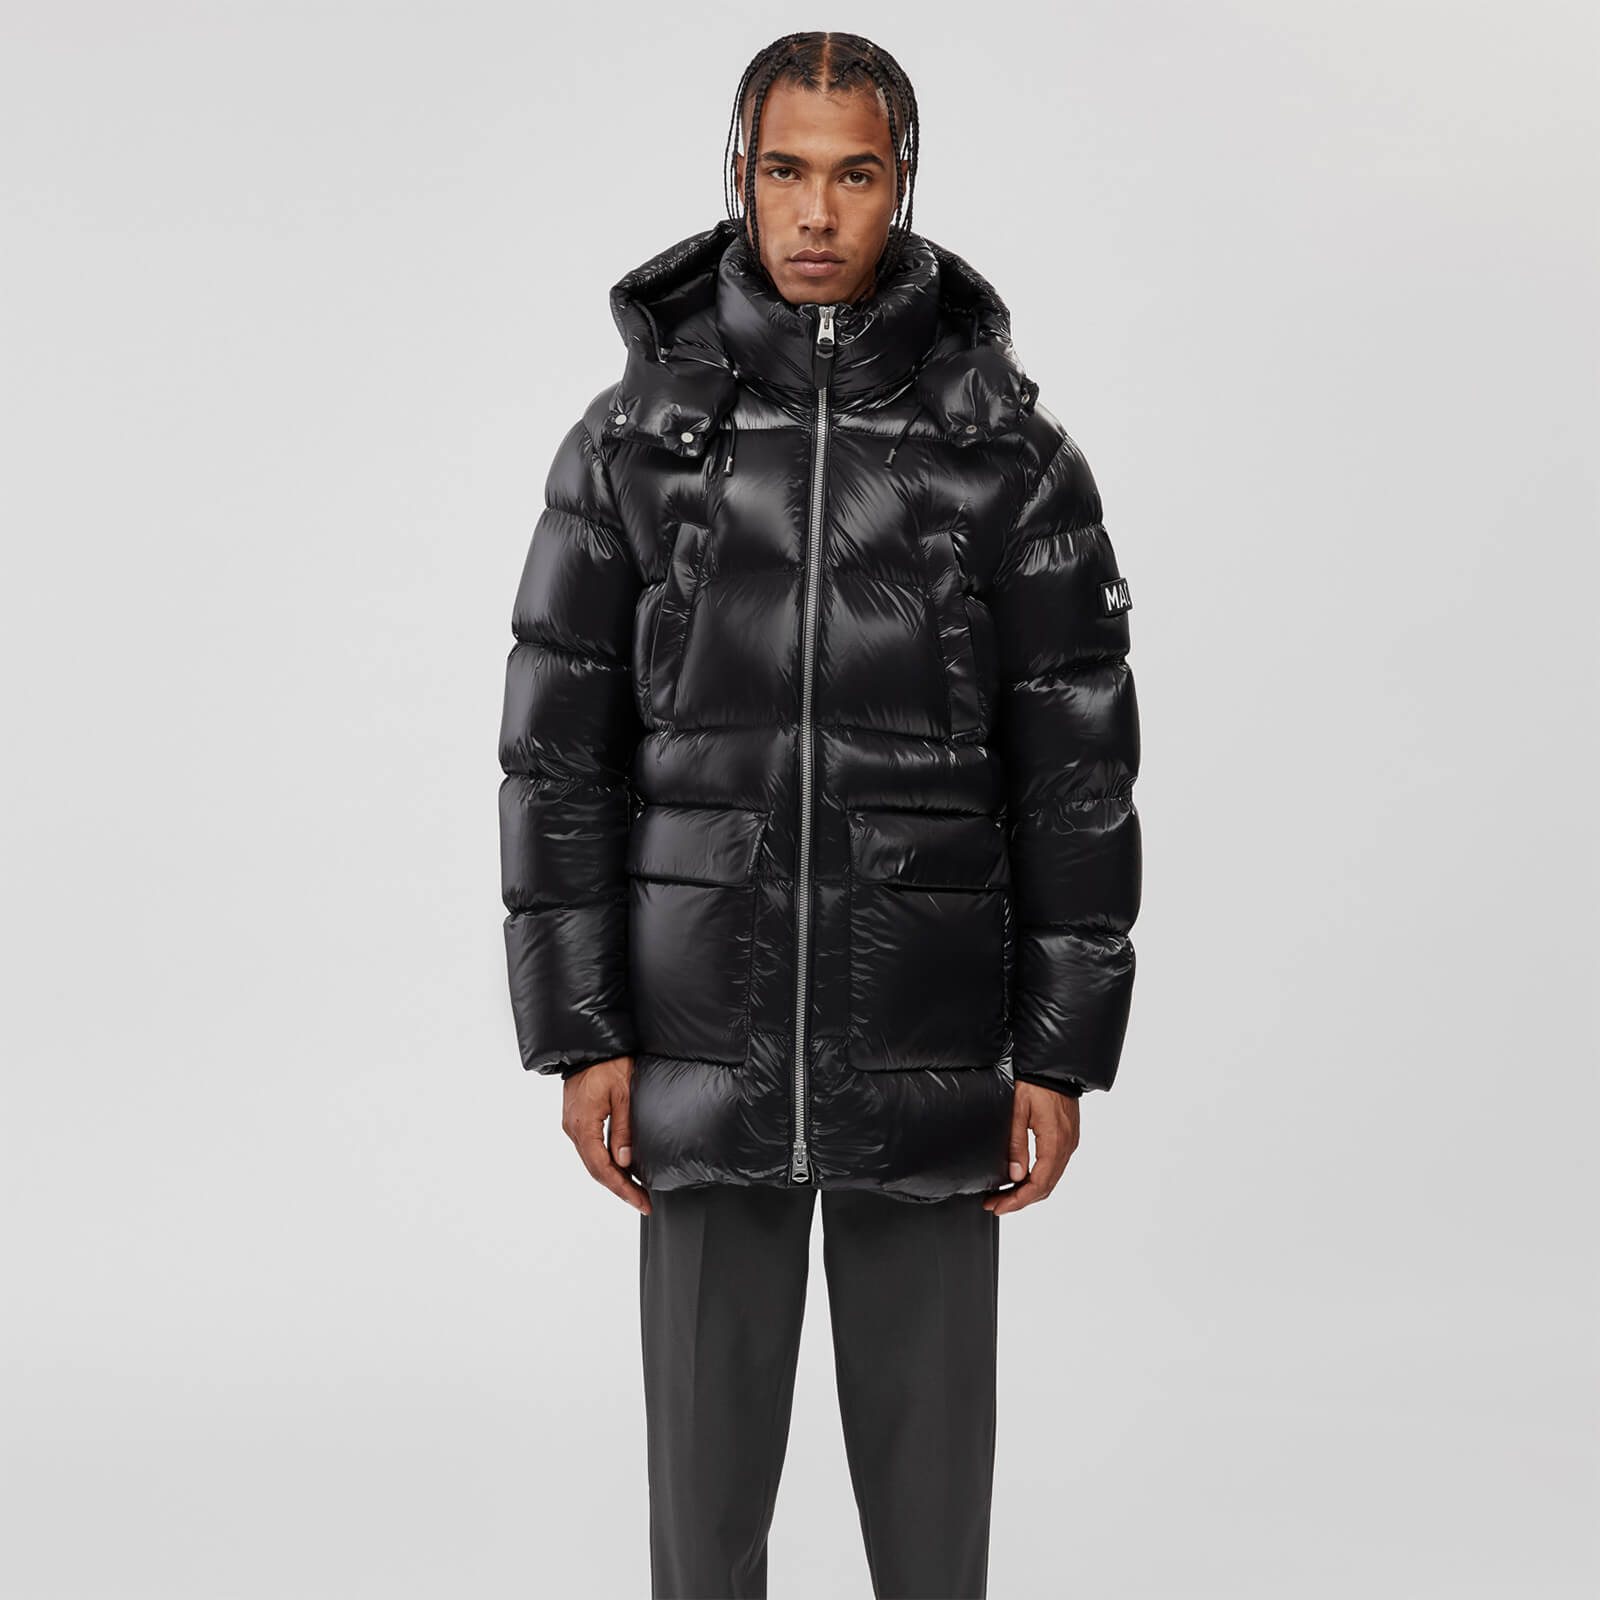 Mackage Men's Kendrick Down Puffer with Removable Hood - Black - 40/M